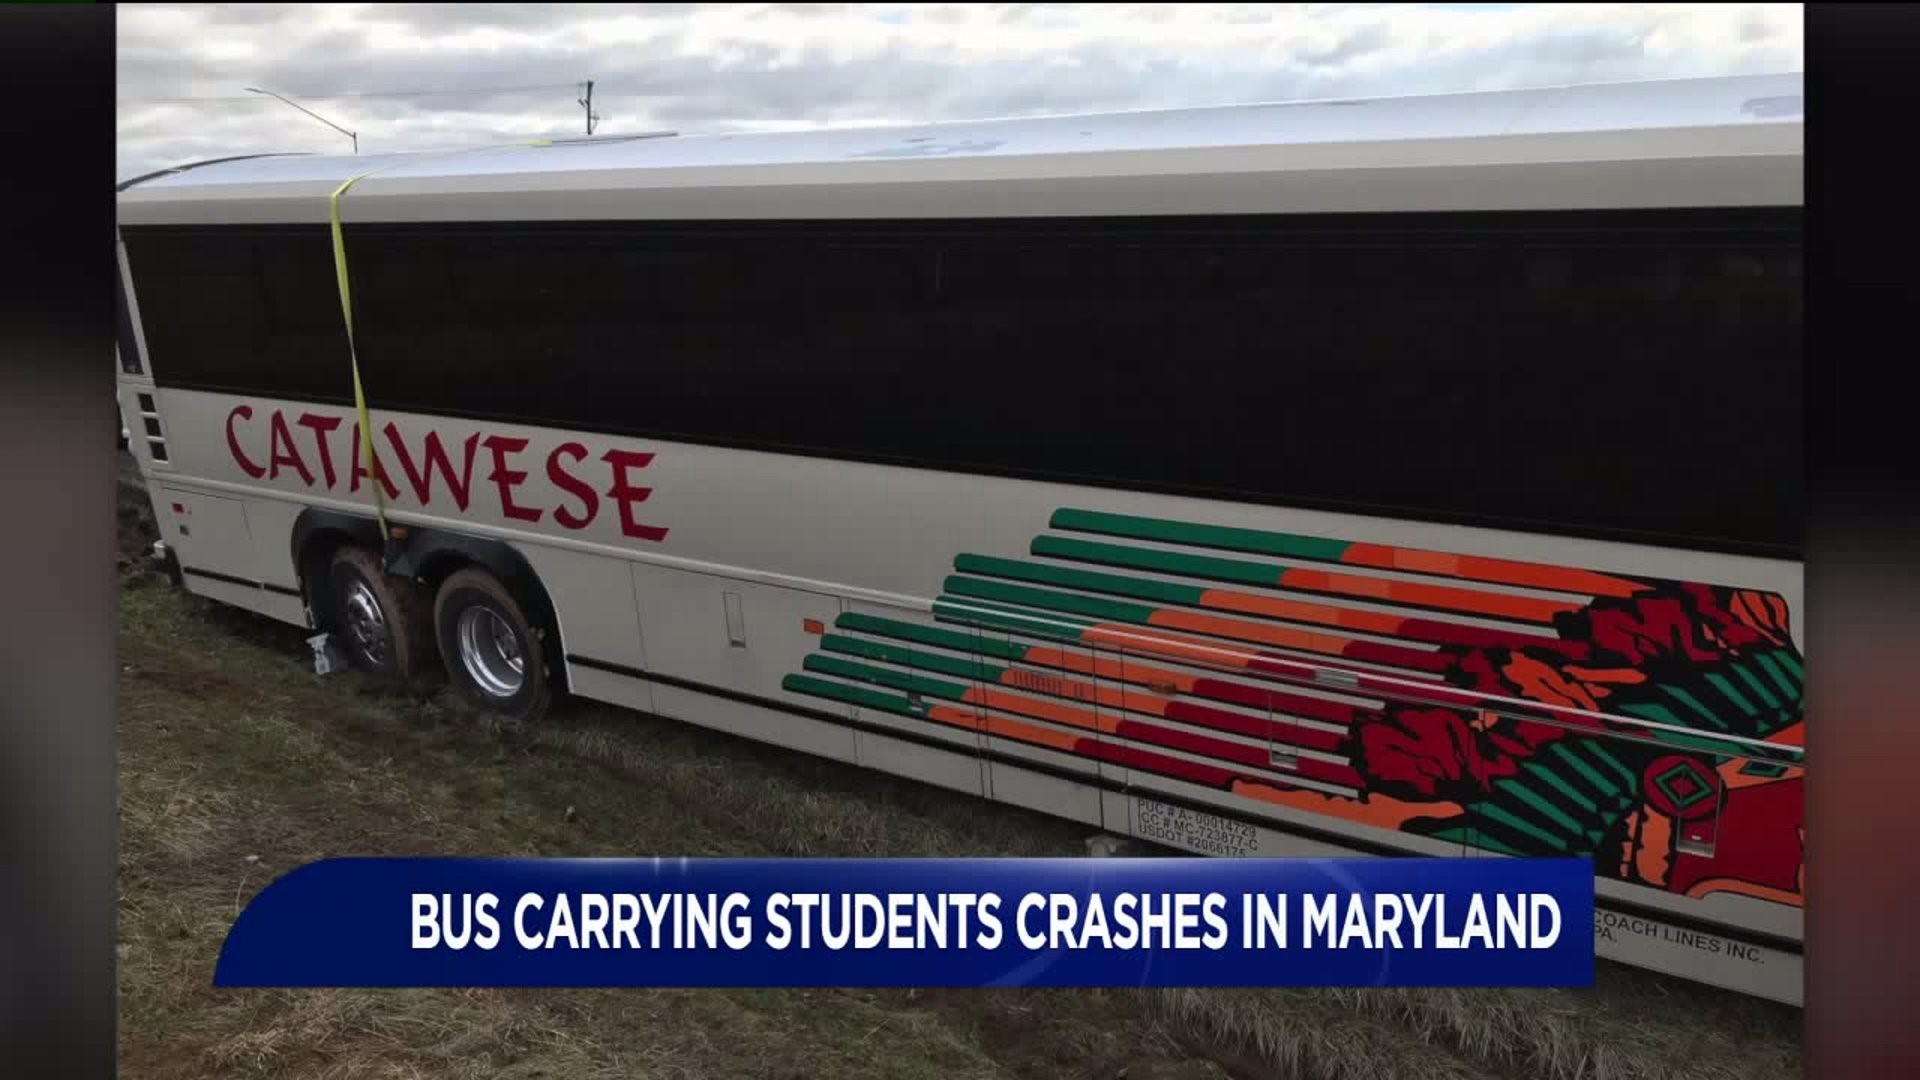 Bus Ran Off the Road in Maryland was Carrying Schuylkill County Students